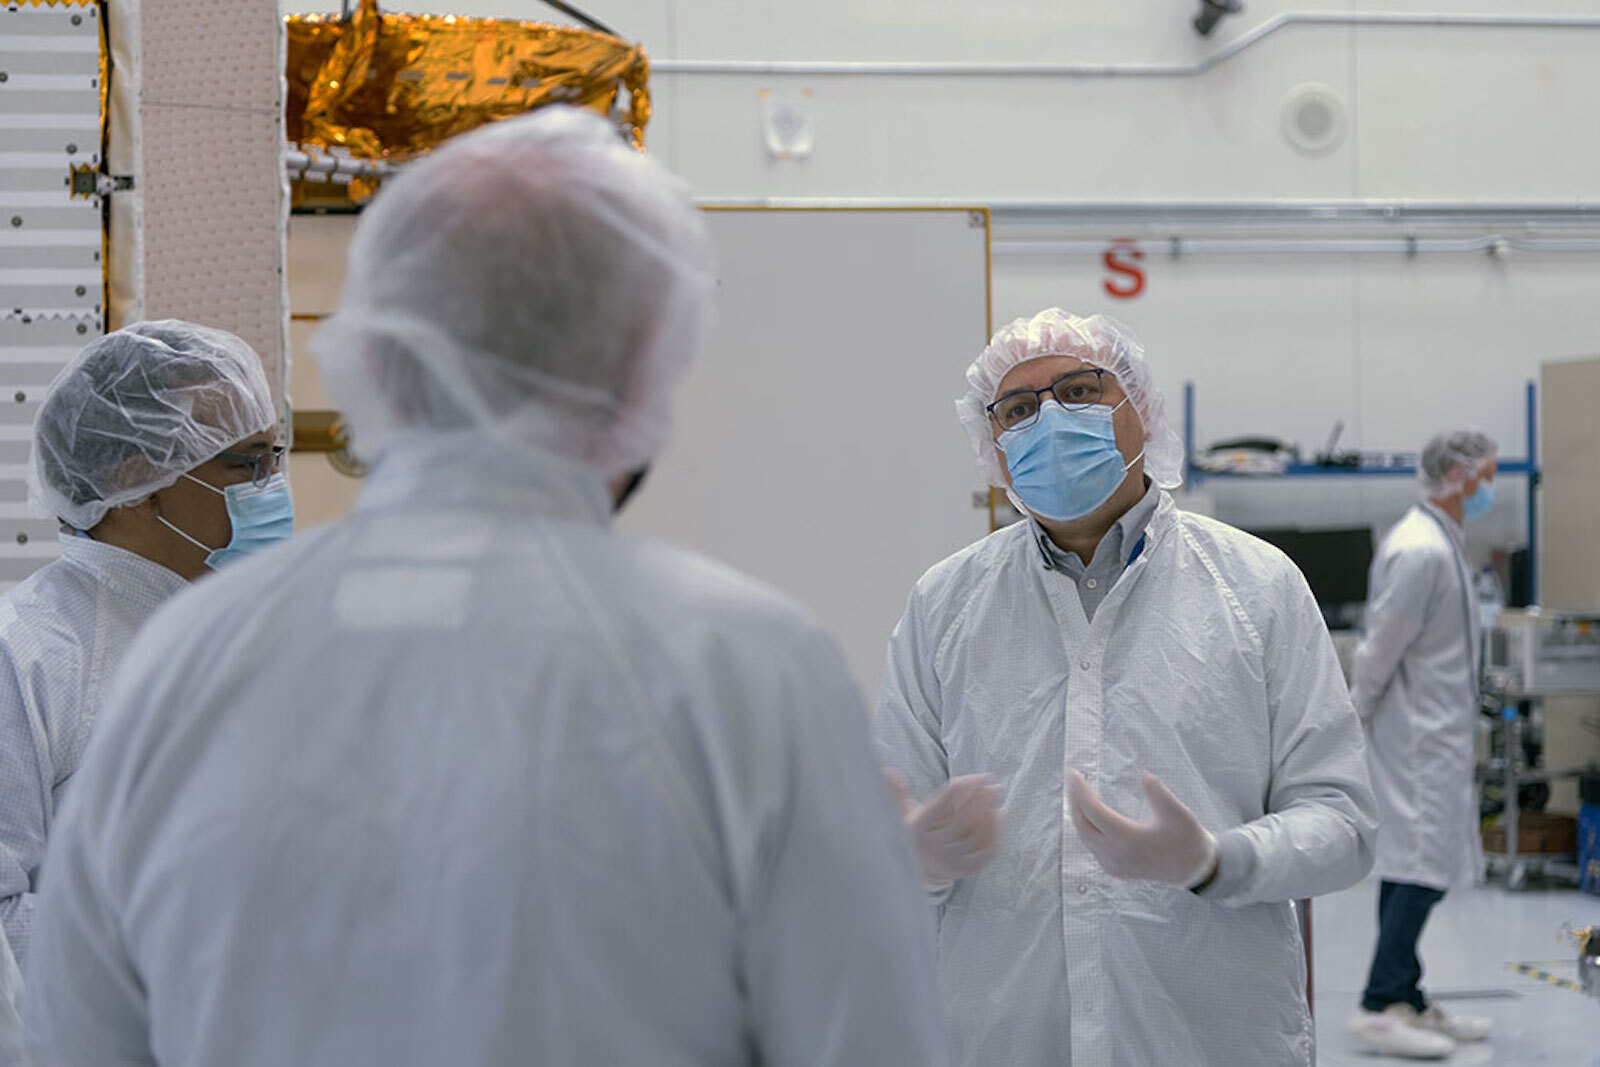 Project Manger Parage Vaze stands in the JPL clean room where the SWOT satellite is being assembled. The spacecraft will help researchers survey the amount and distribution of Earth’s surface water, including fresh water in lakes and rivers, as well as the ocean. Credit: NASA/JPL-Caltech